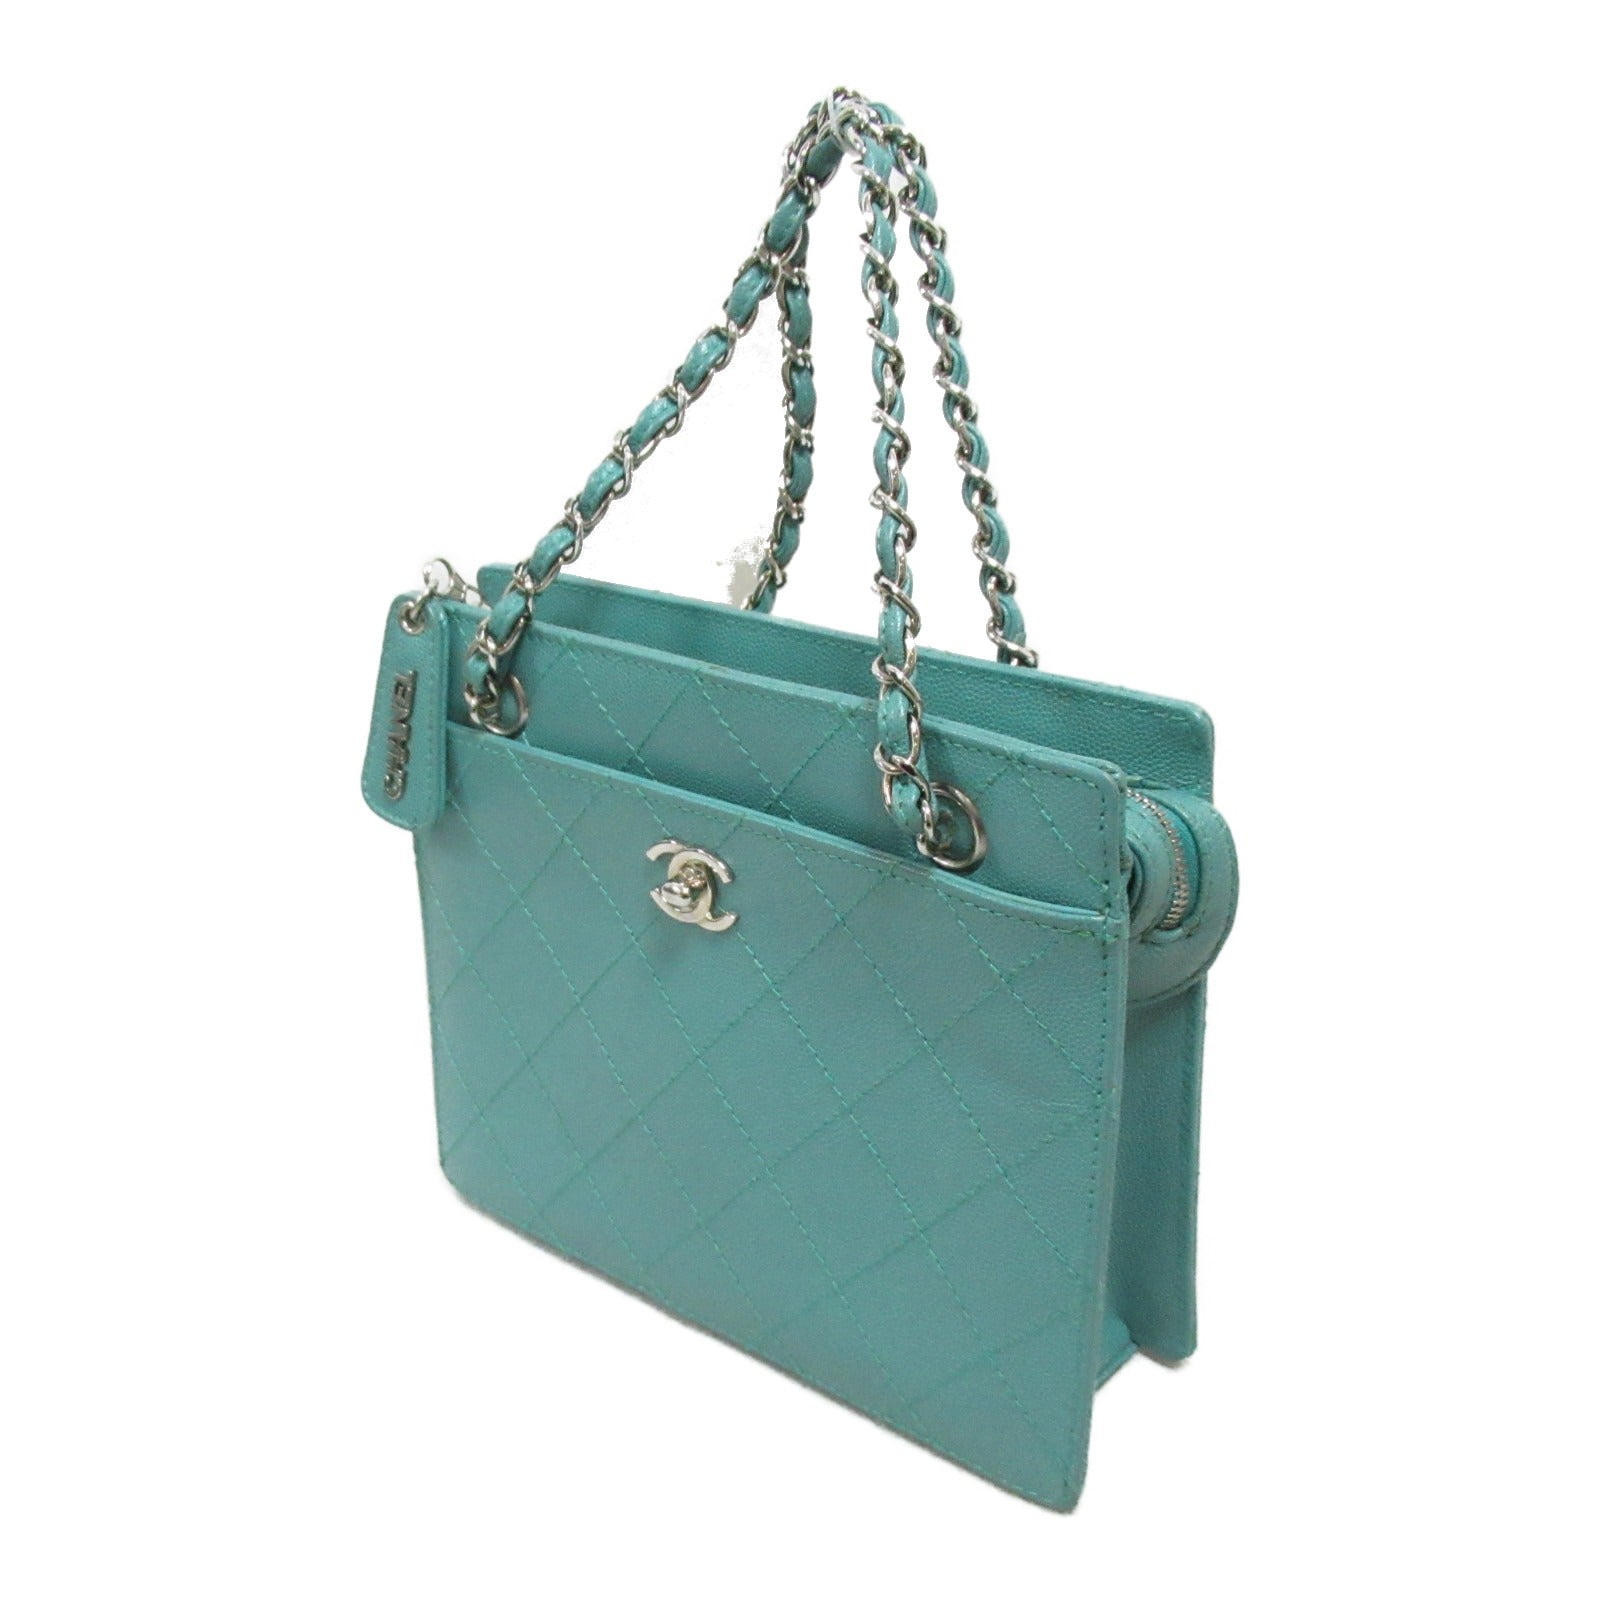 Chanel Chain Handbag Chain Handbag Chain Handbag Cabia S (Green )  Green Turquoise